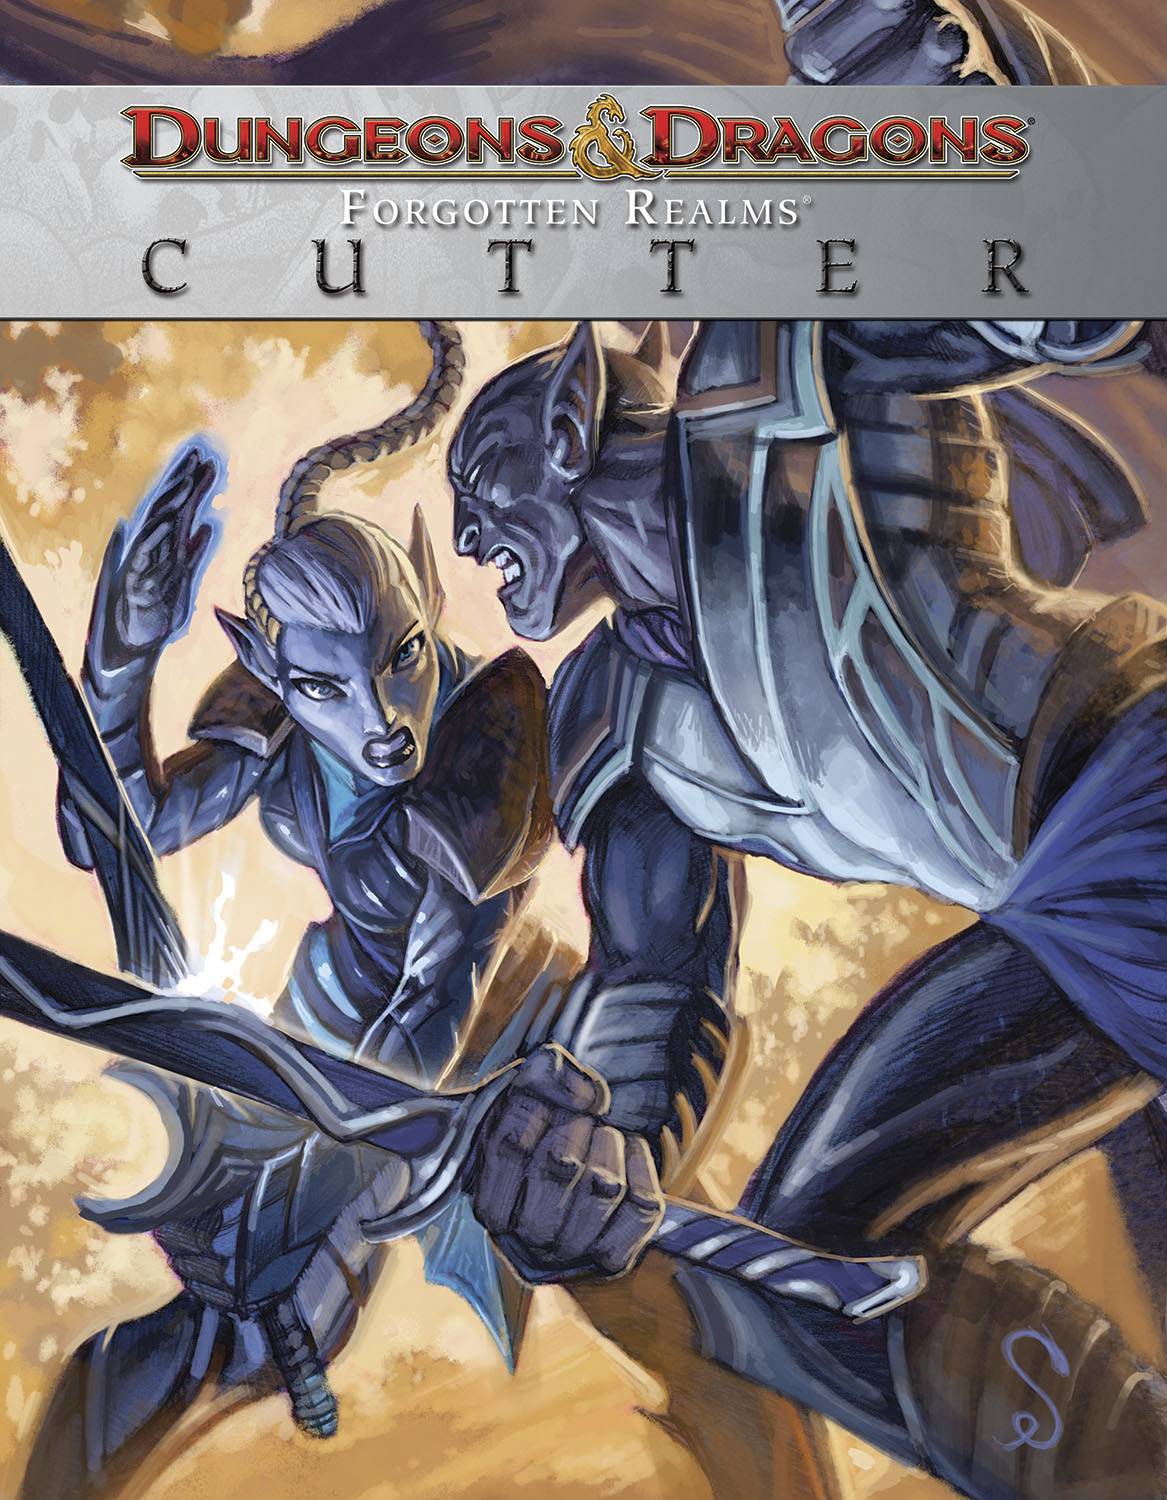 Dungeons & Dragons Cutter Graphic Novel